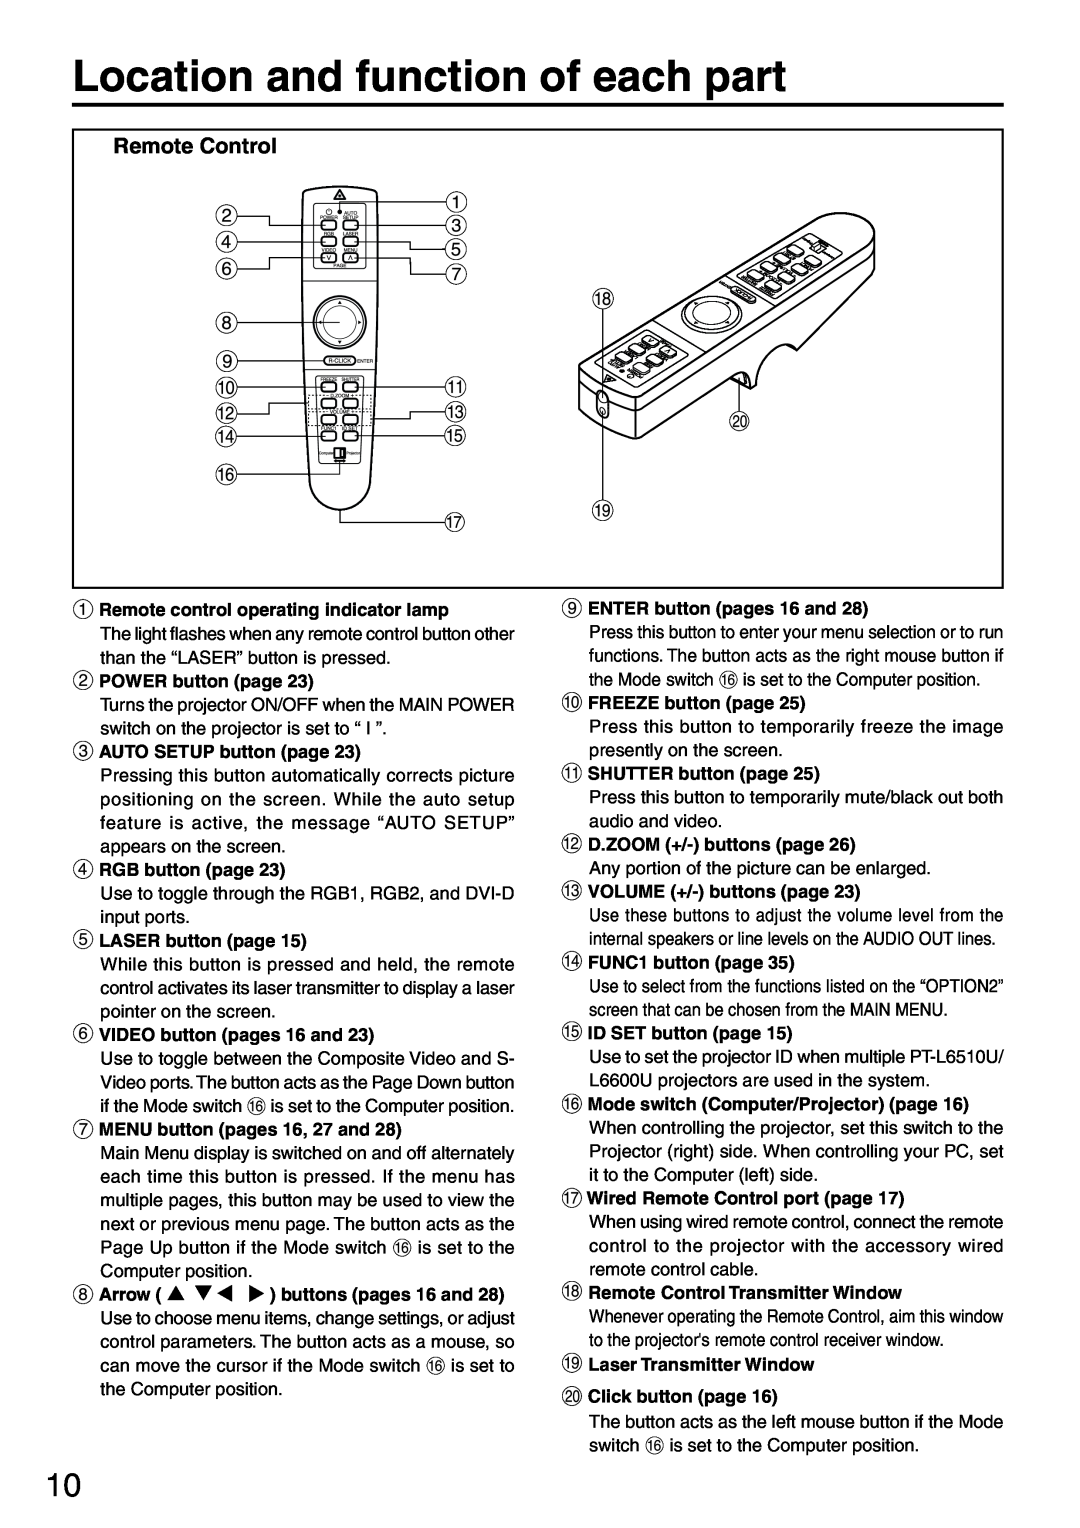 Panasonic PT-L6510U manual Location and function of each part, Remote Control 